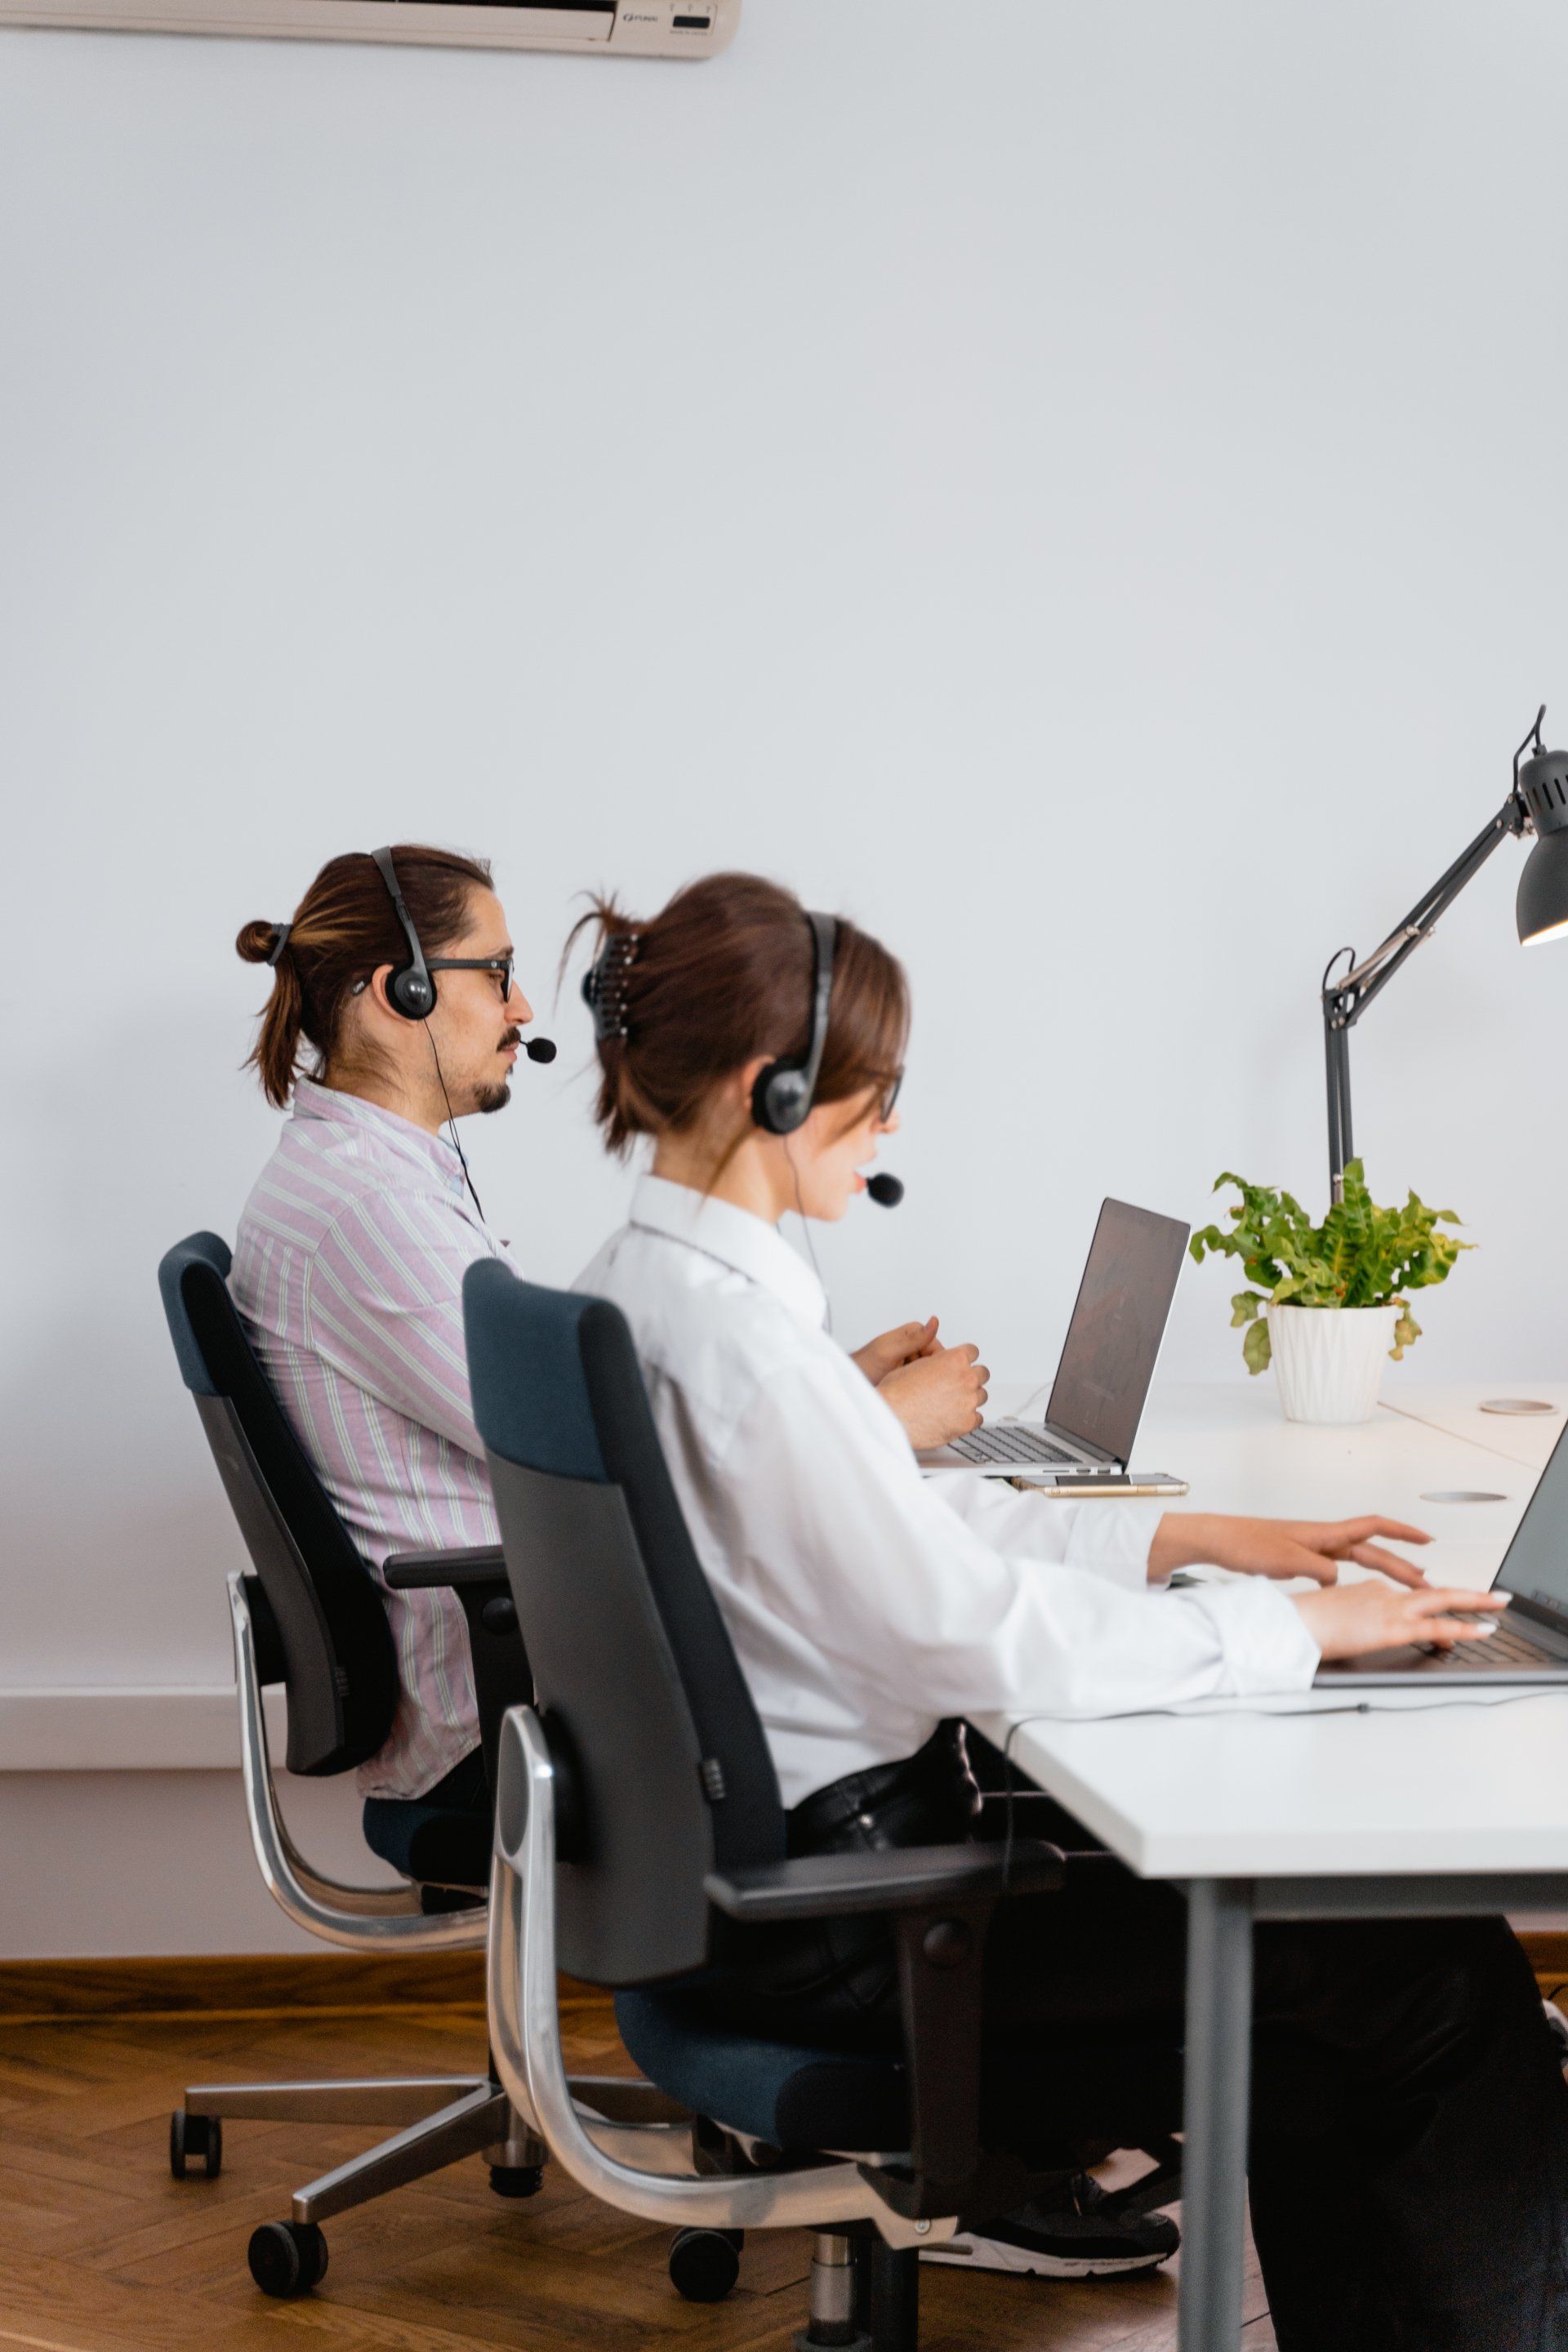 A man and a woman wearing headsets are sitting at a desk with laptops.